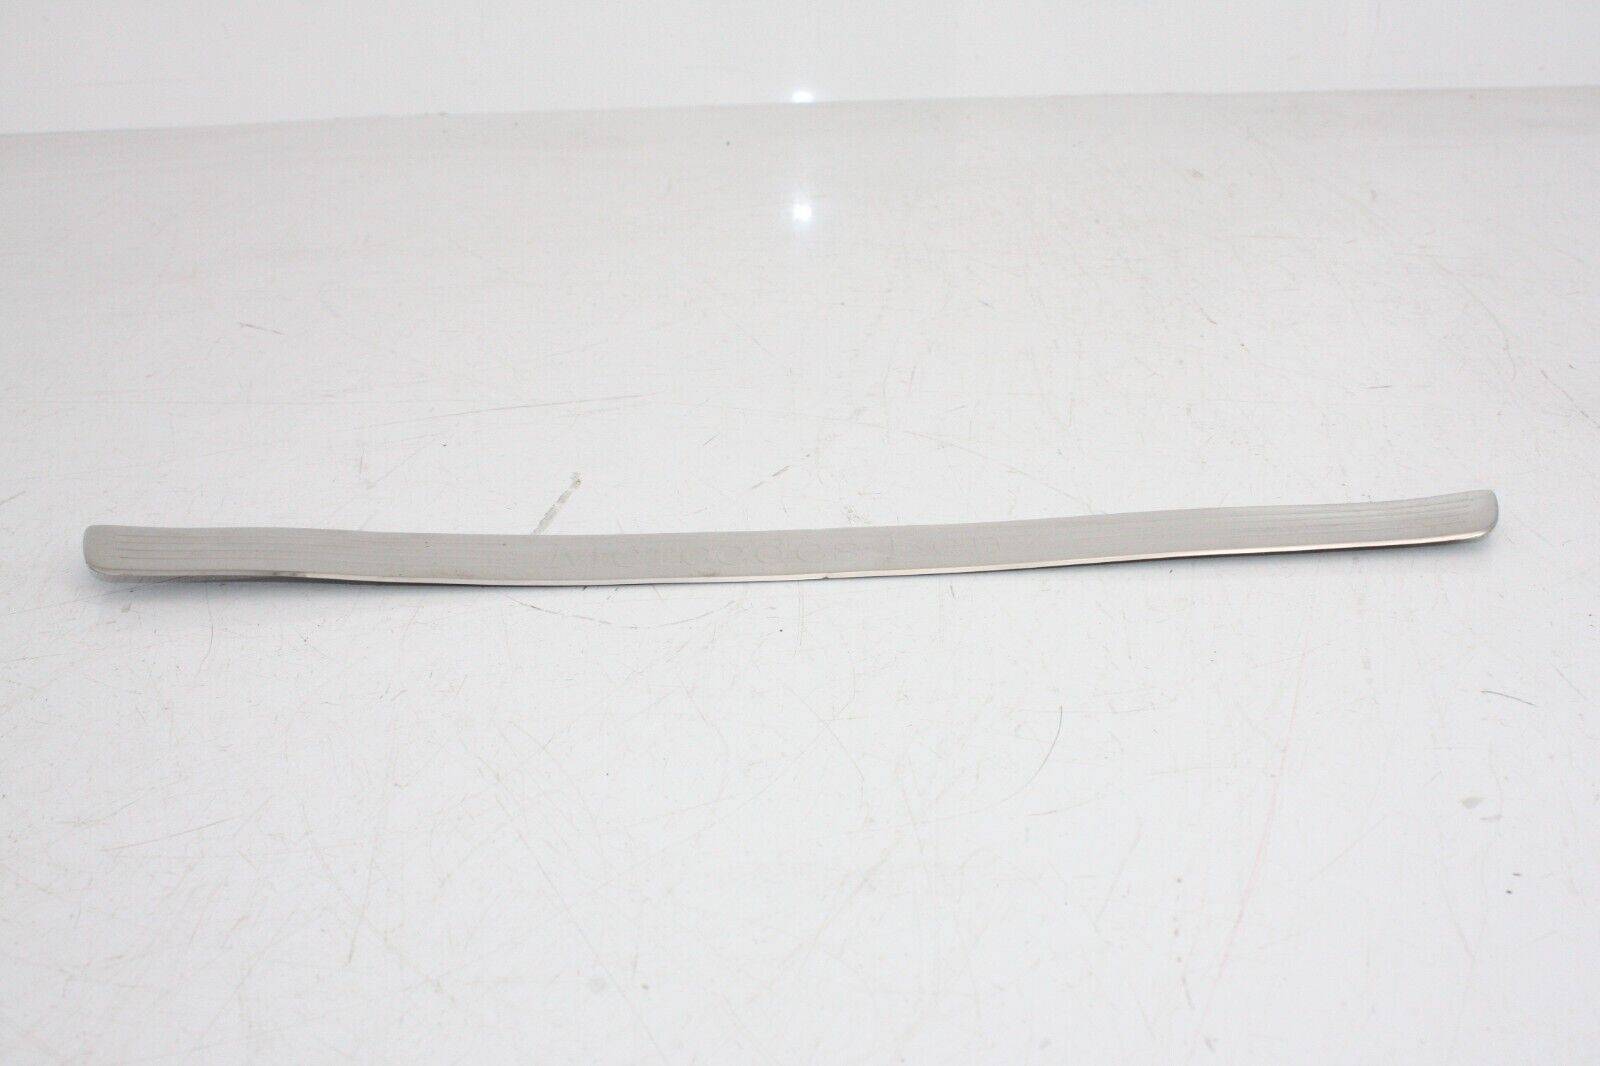 MERCEDES-S-CLASS-W222-FRONT-LEFT-DOOR-SILL-TRIM-COVER-2013-TO-2017-176192451894-4